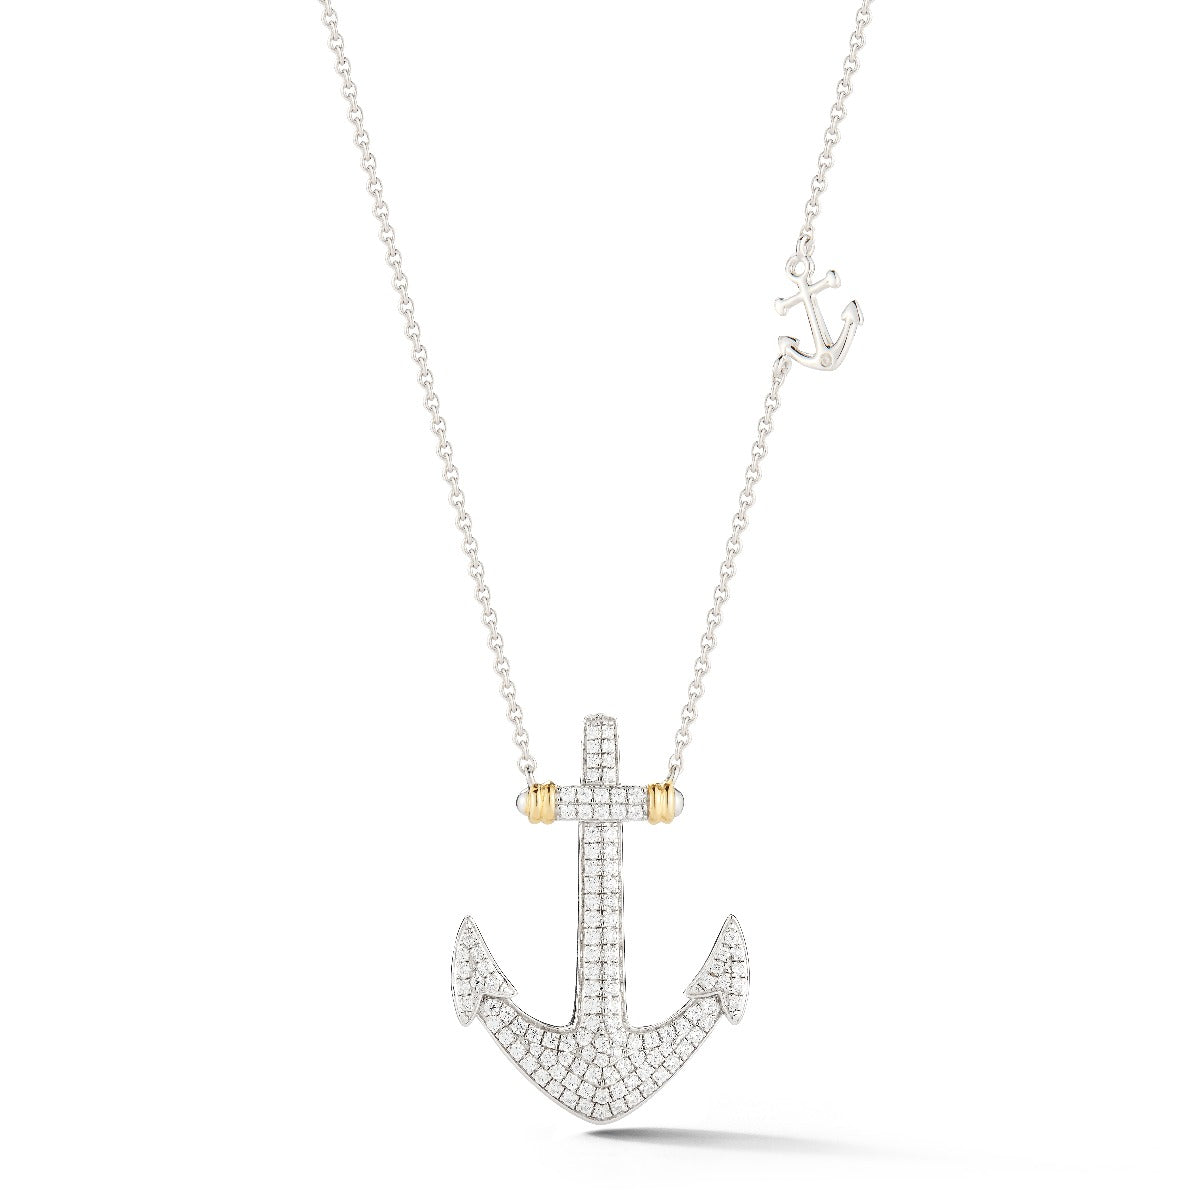 14K DIAMOND PAVE ANCHOR T.W 0.57CT 1 INCH LONG BY 3/4 ON 18 INCHES CHAIN